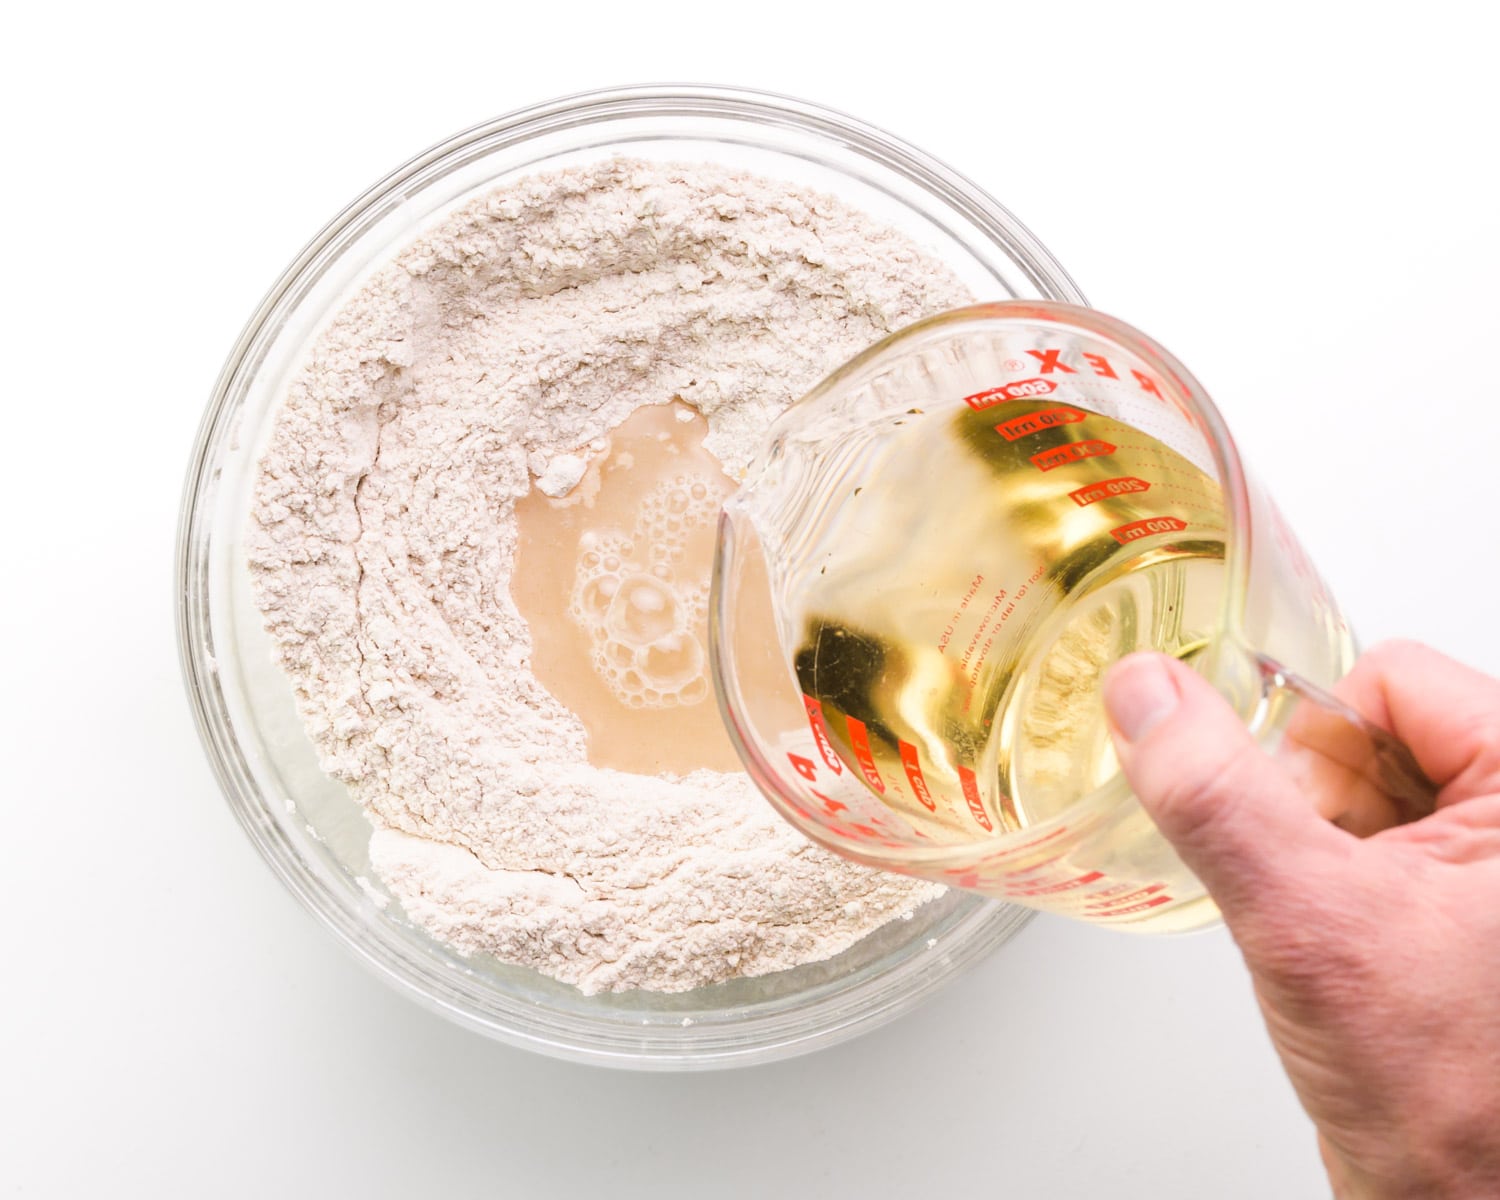 A hand holds a glass measuring cup, pouring a liquid ingredient into a bowl of flour.